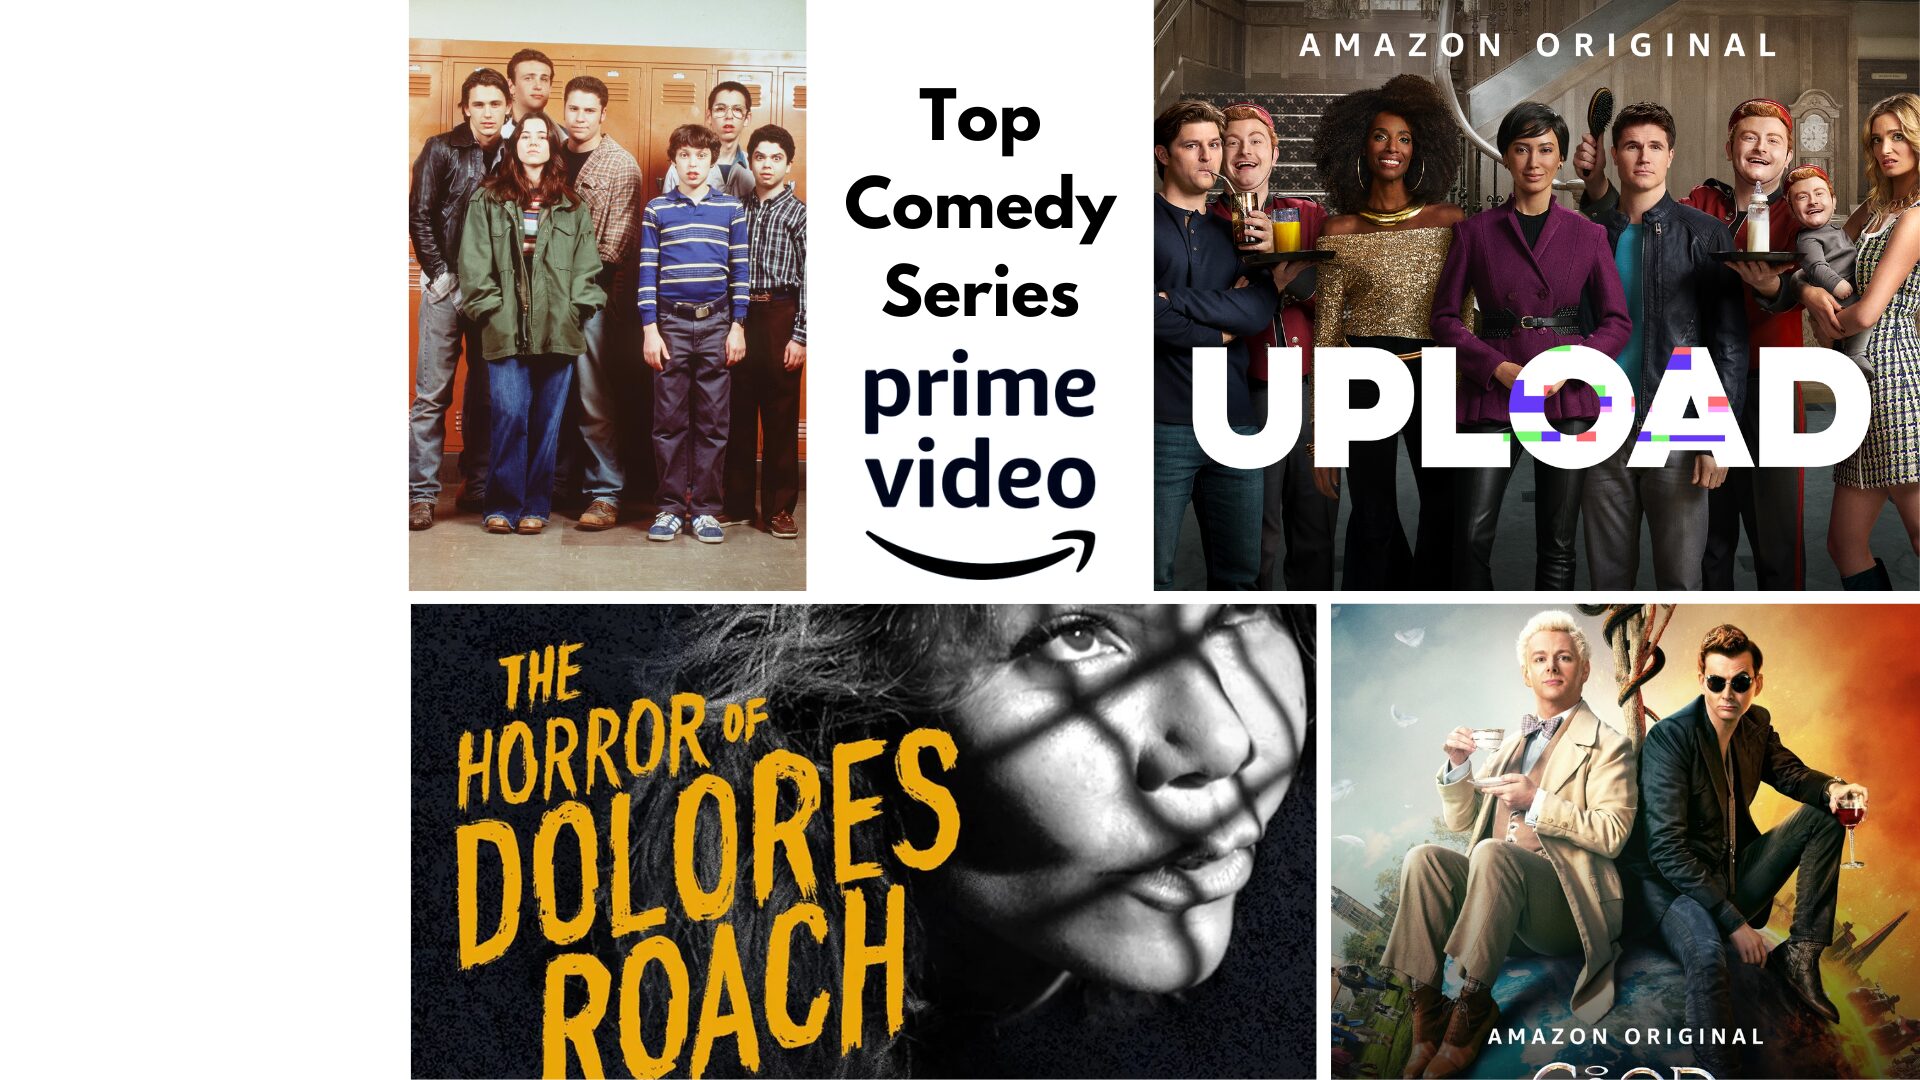 Top Comedy Series to Stream on Prime Video This Summer